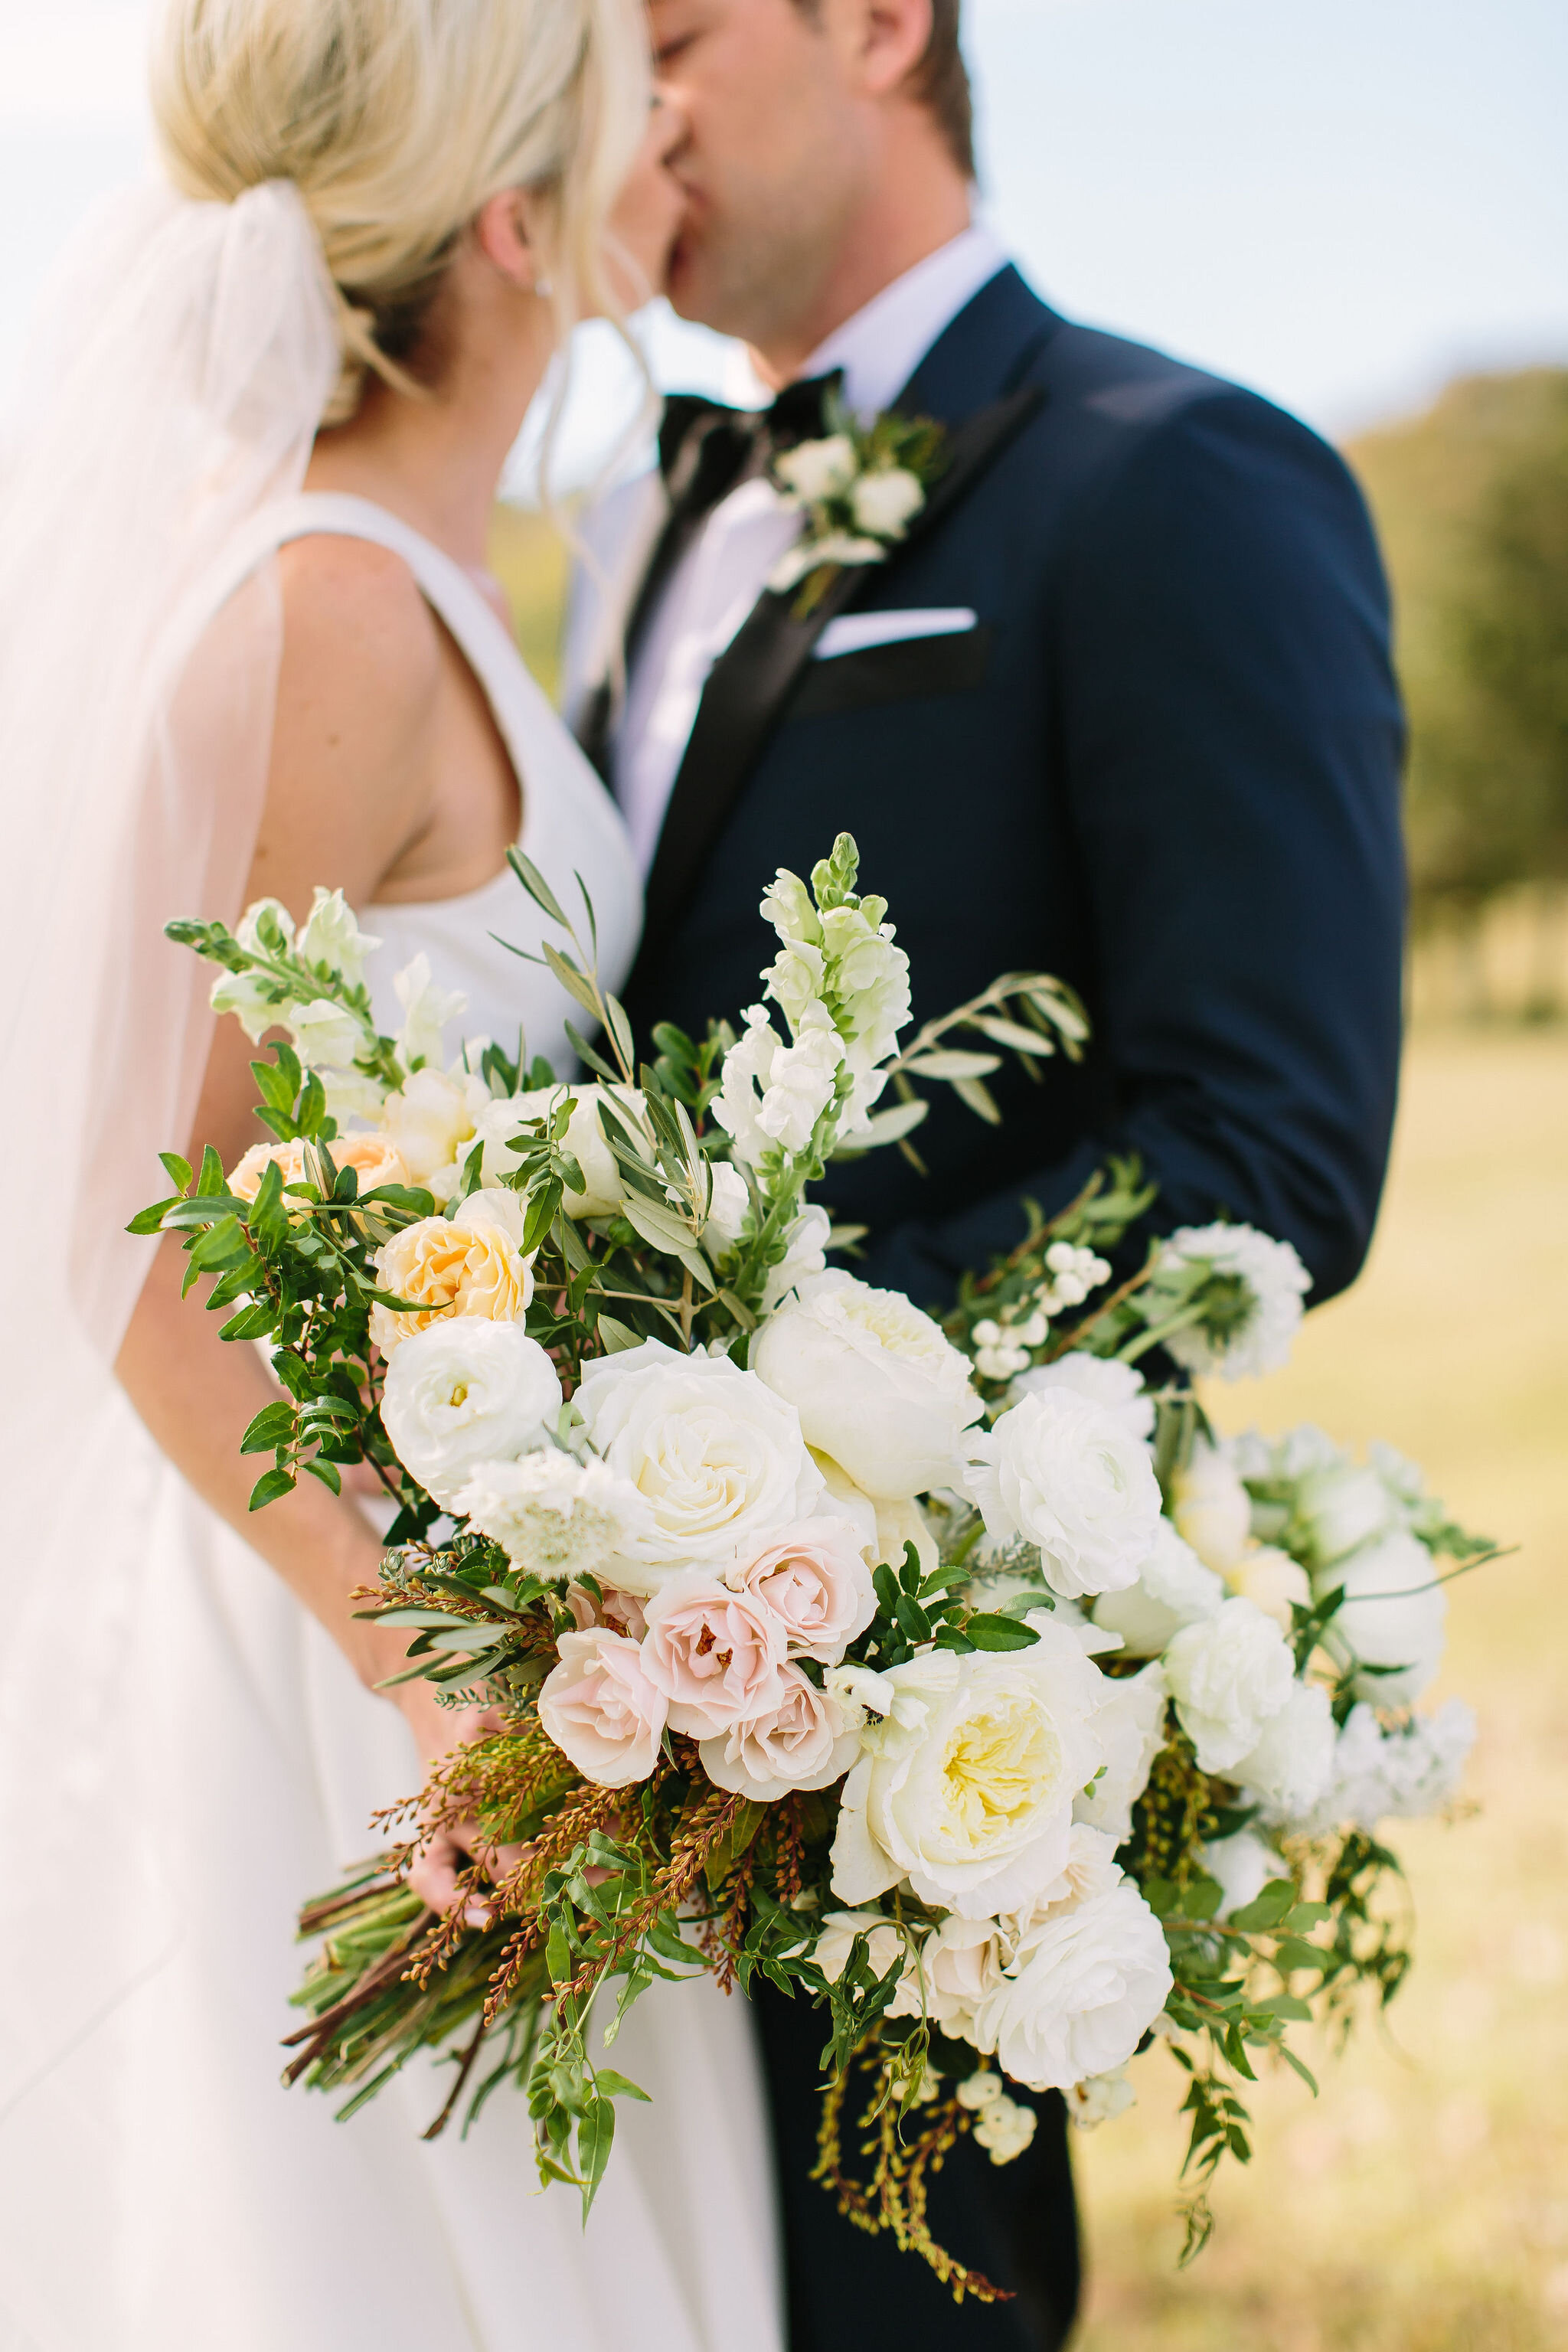 All white bridal bouquet with garden roses, ranunculus, snapdragons, scabiosa, and trailing greenery. Organic wedding floral design in Nashville, TN.